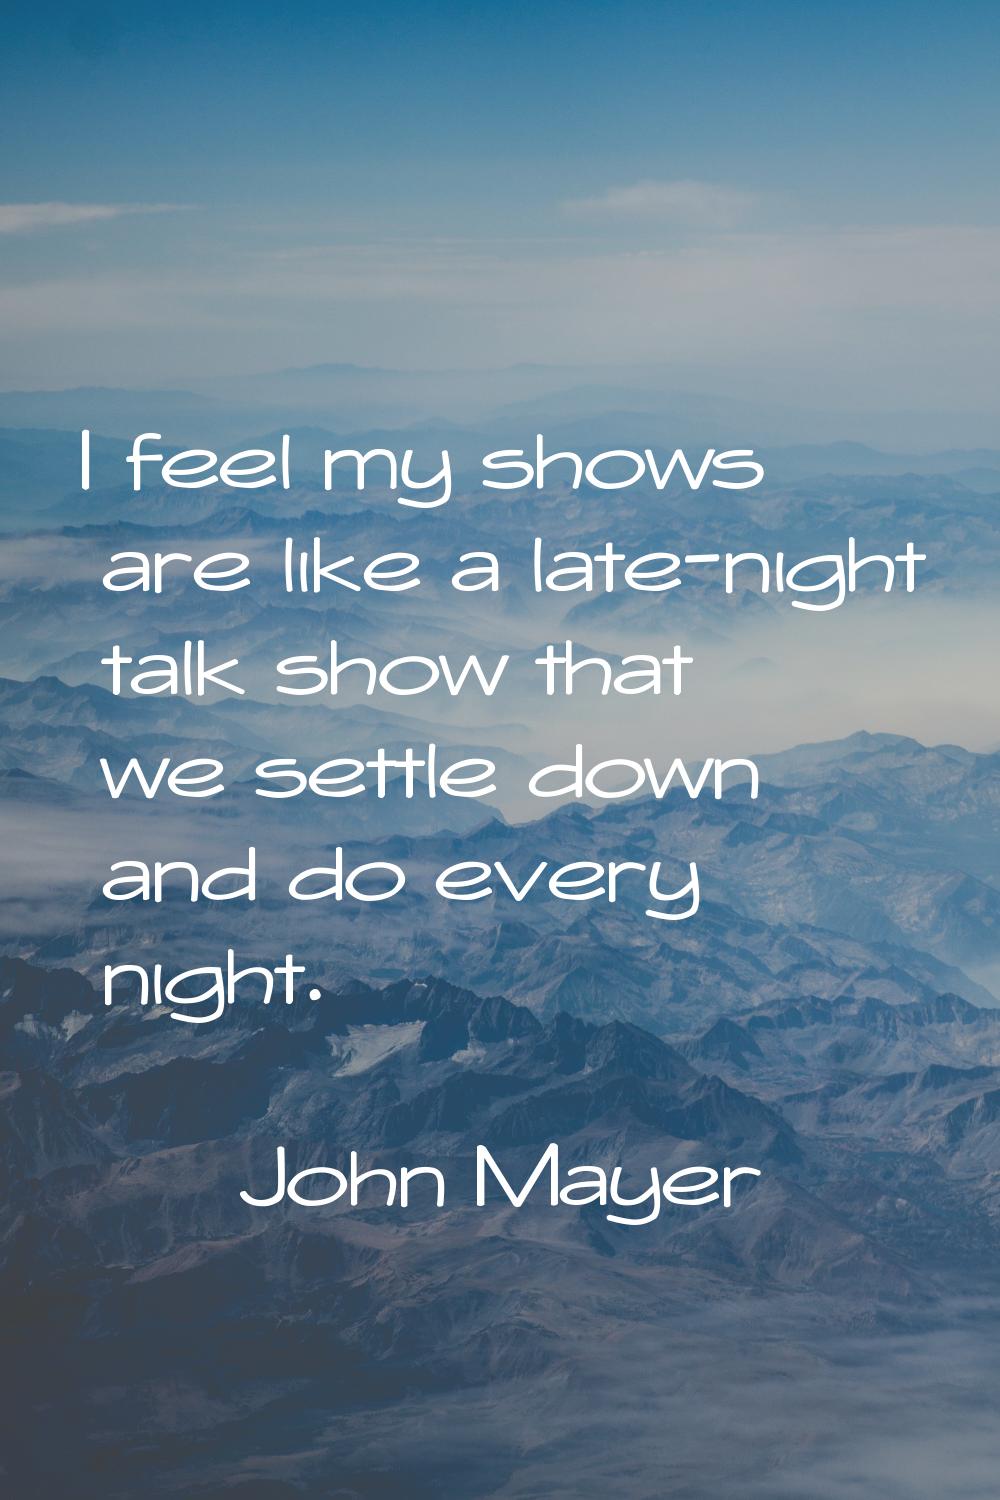 I feel my shows are like a late-night talk show that we settle down and do every night.